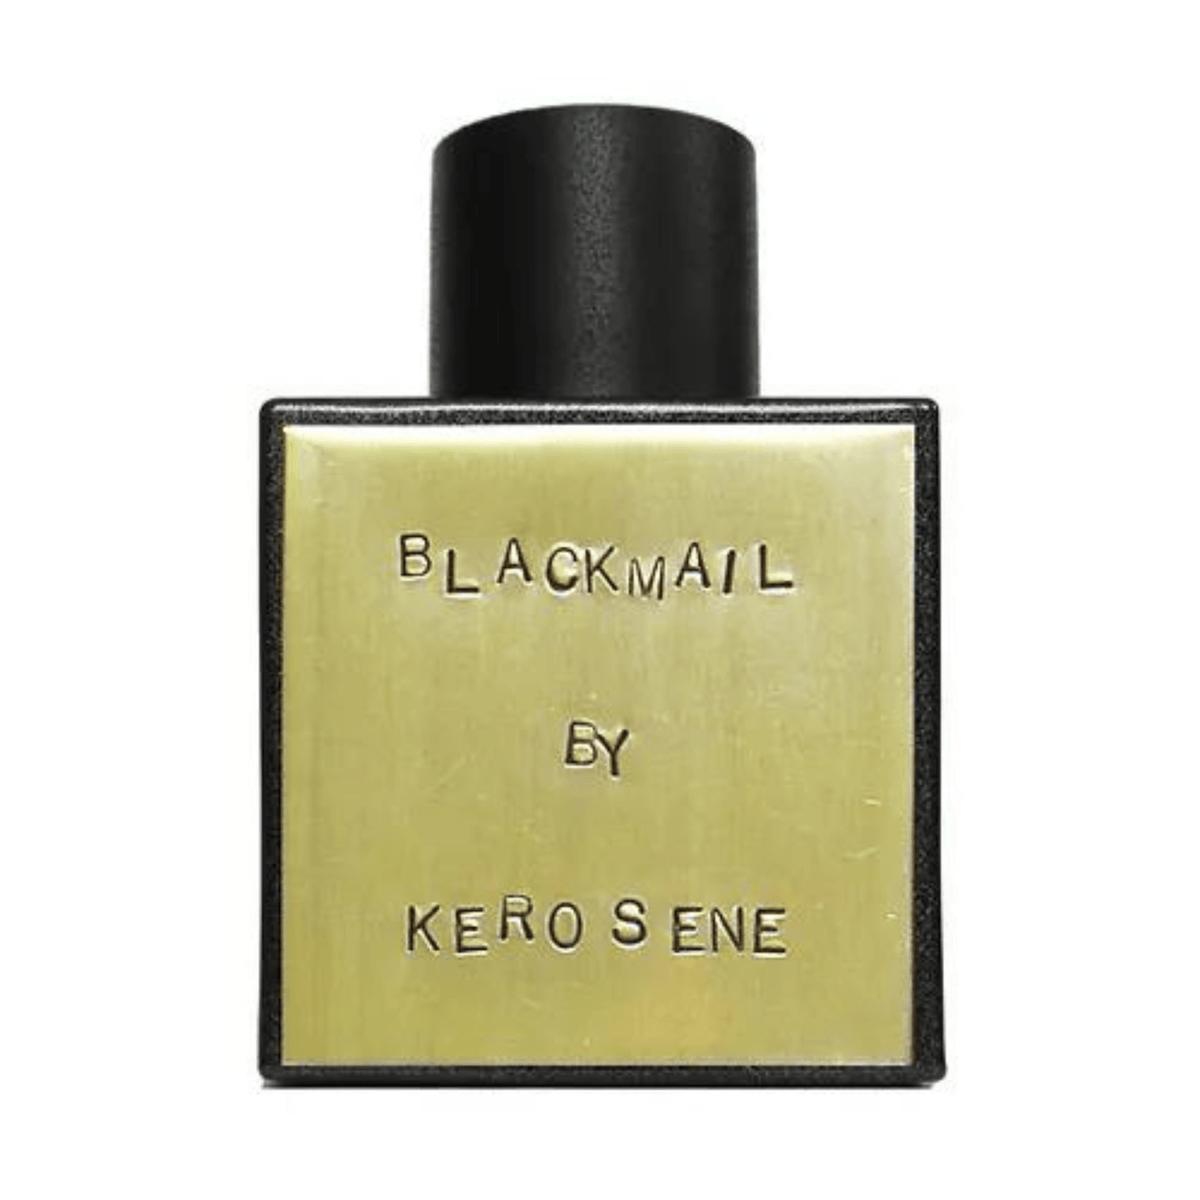 Primary Image of Blackmail EDP